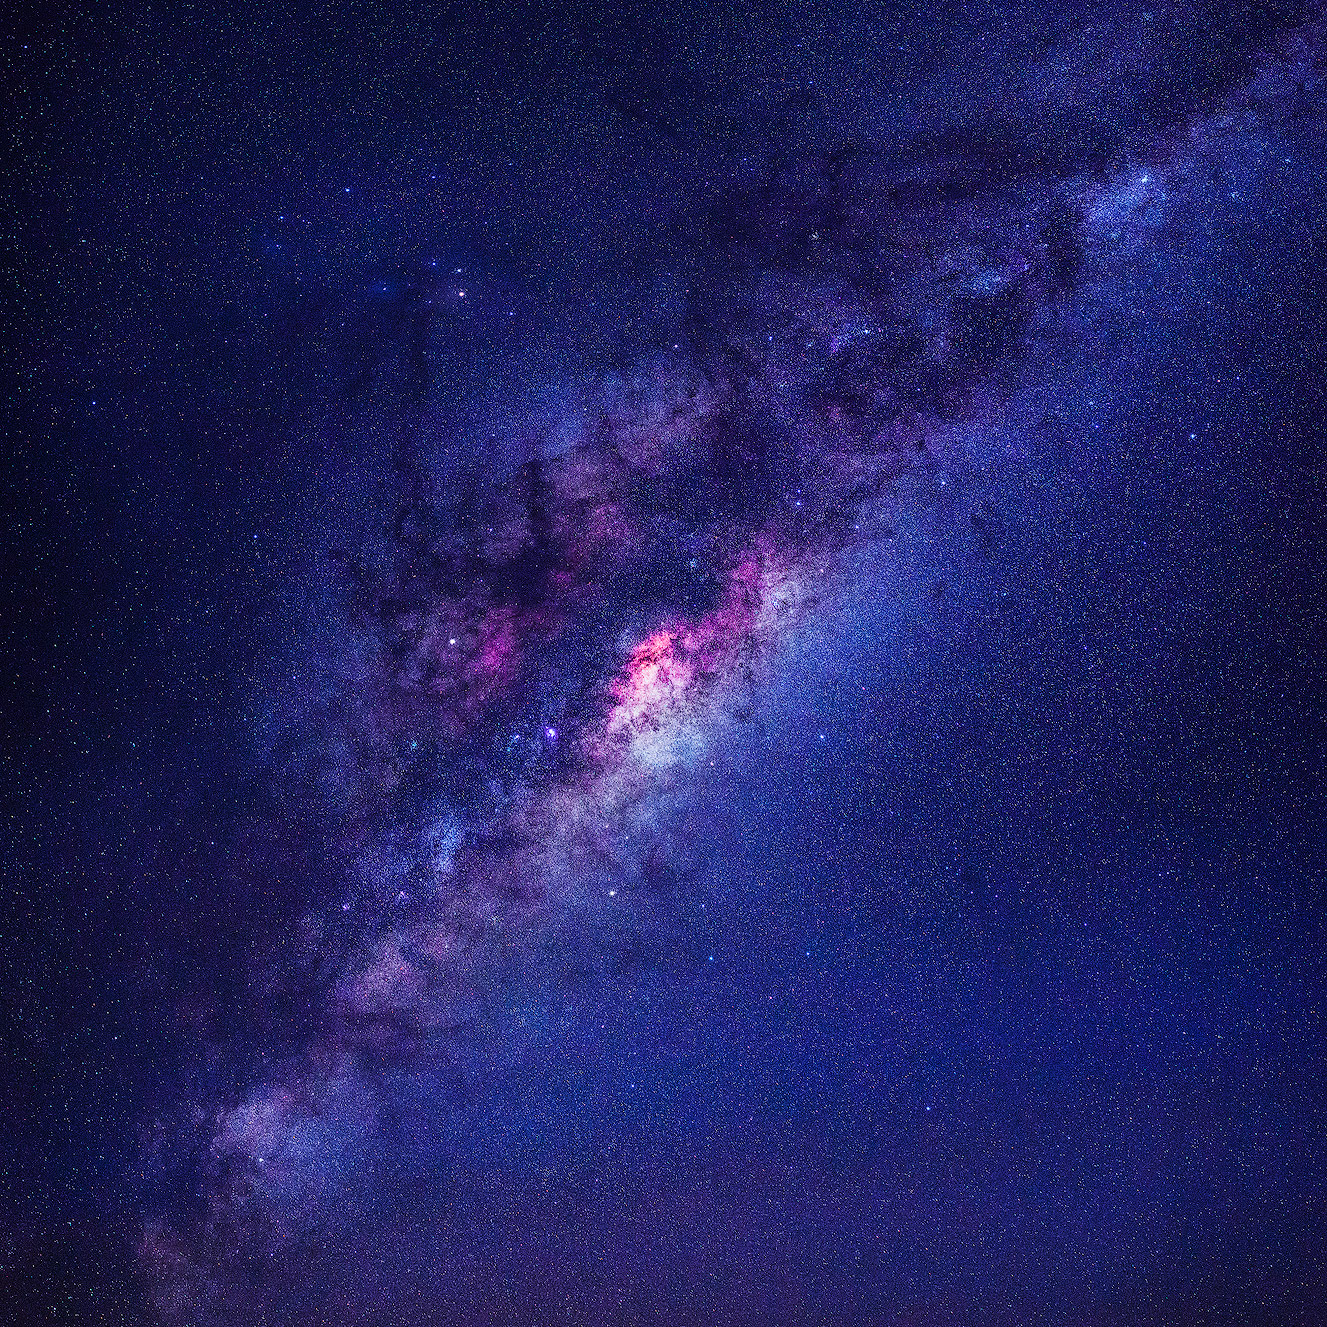 zpostsinstagram stock photography | The Milky Way Galaxy in Southern Sky, Photographed on Sydney's Northern Beaches, Sydney, NSW, Australia, Image ID INSTAGRAM-9996